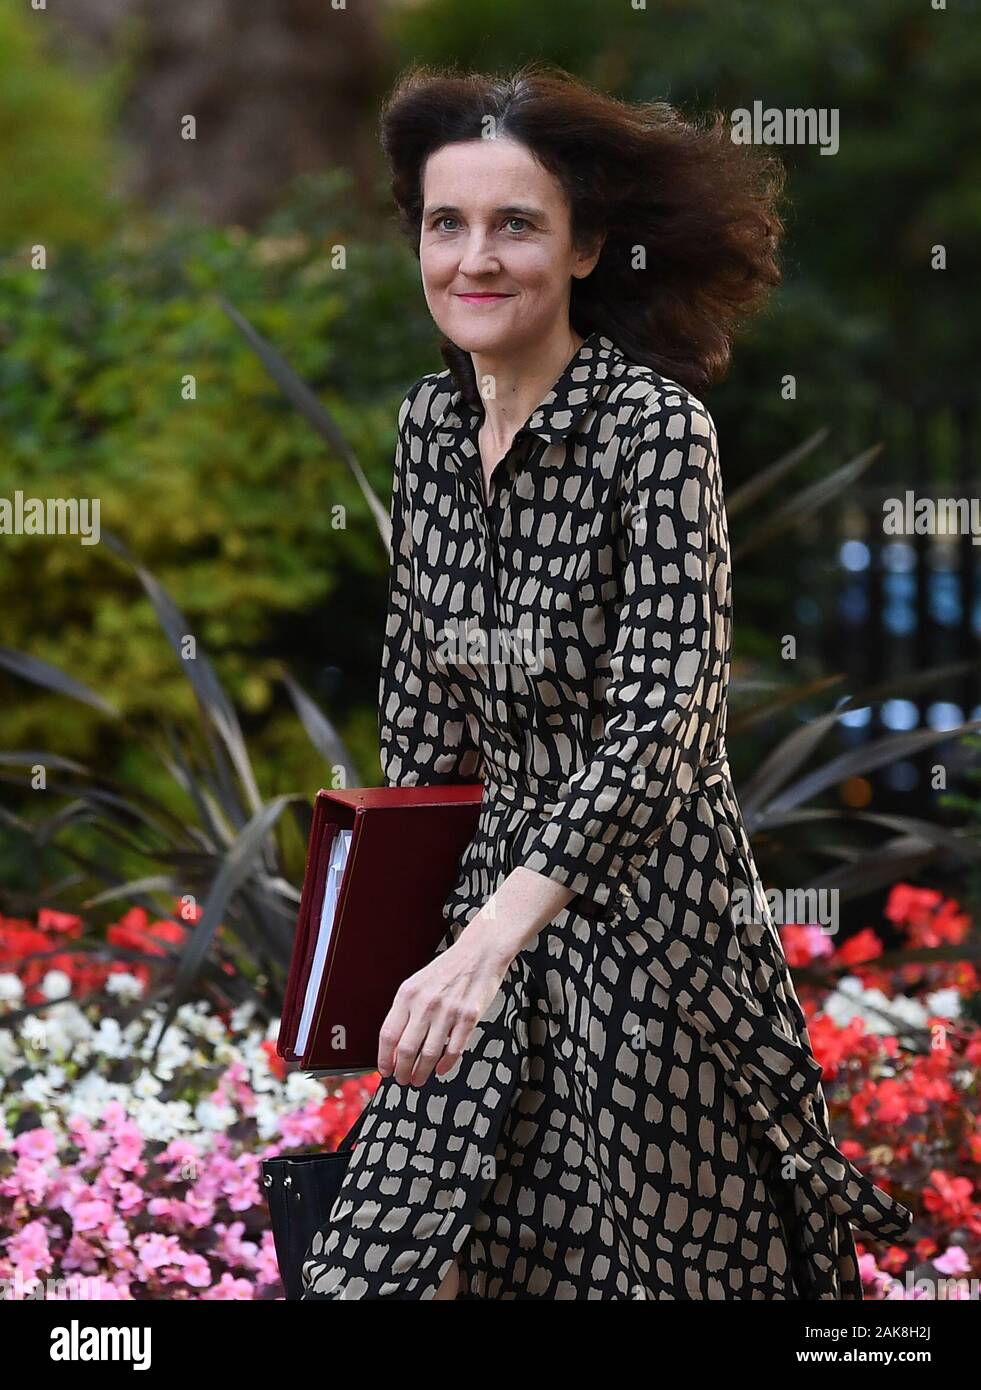 Environment, Food and Rural Affairs Secretary Theresa Villiers who will confirm on Wednesday that new laws will see farmers paid for 'public goods' such as boosting nature and tackling climate change. Stock Photo